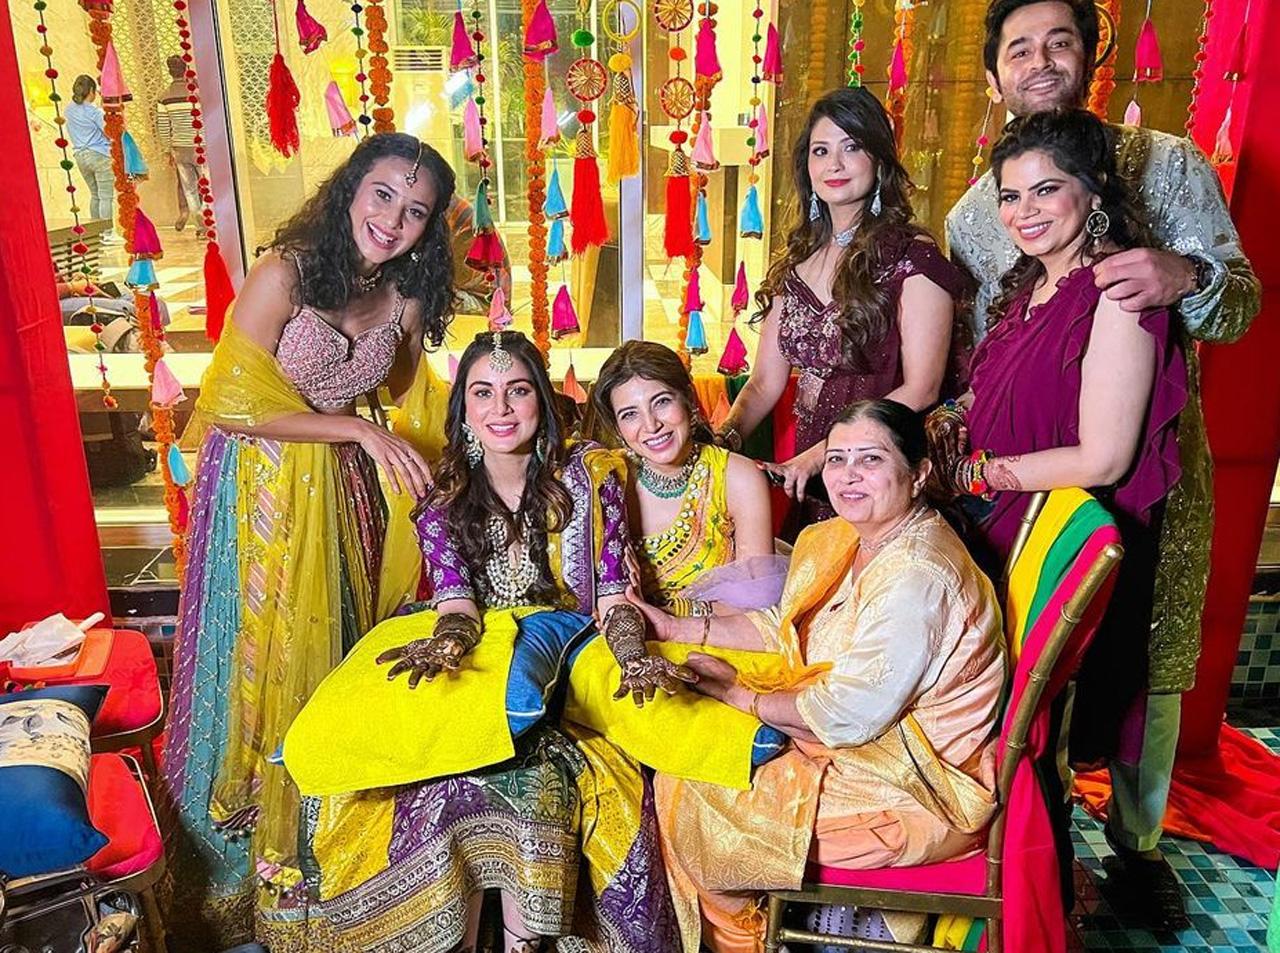 Shraddha Arya indeed loooked like one happpy bride as she posed with family on her Mehendi ceremony. The television actress' friends, who will be soon flying from the city to Delhi, have already started posting fun videos and pictures on Instagram. 